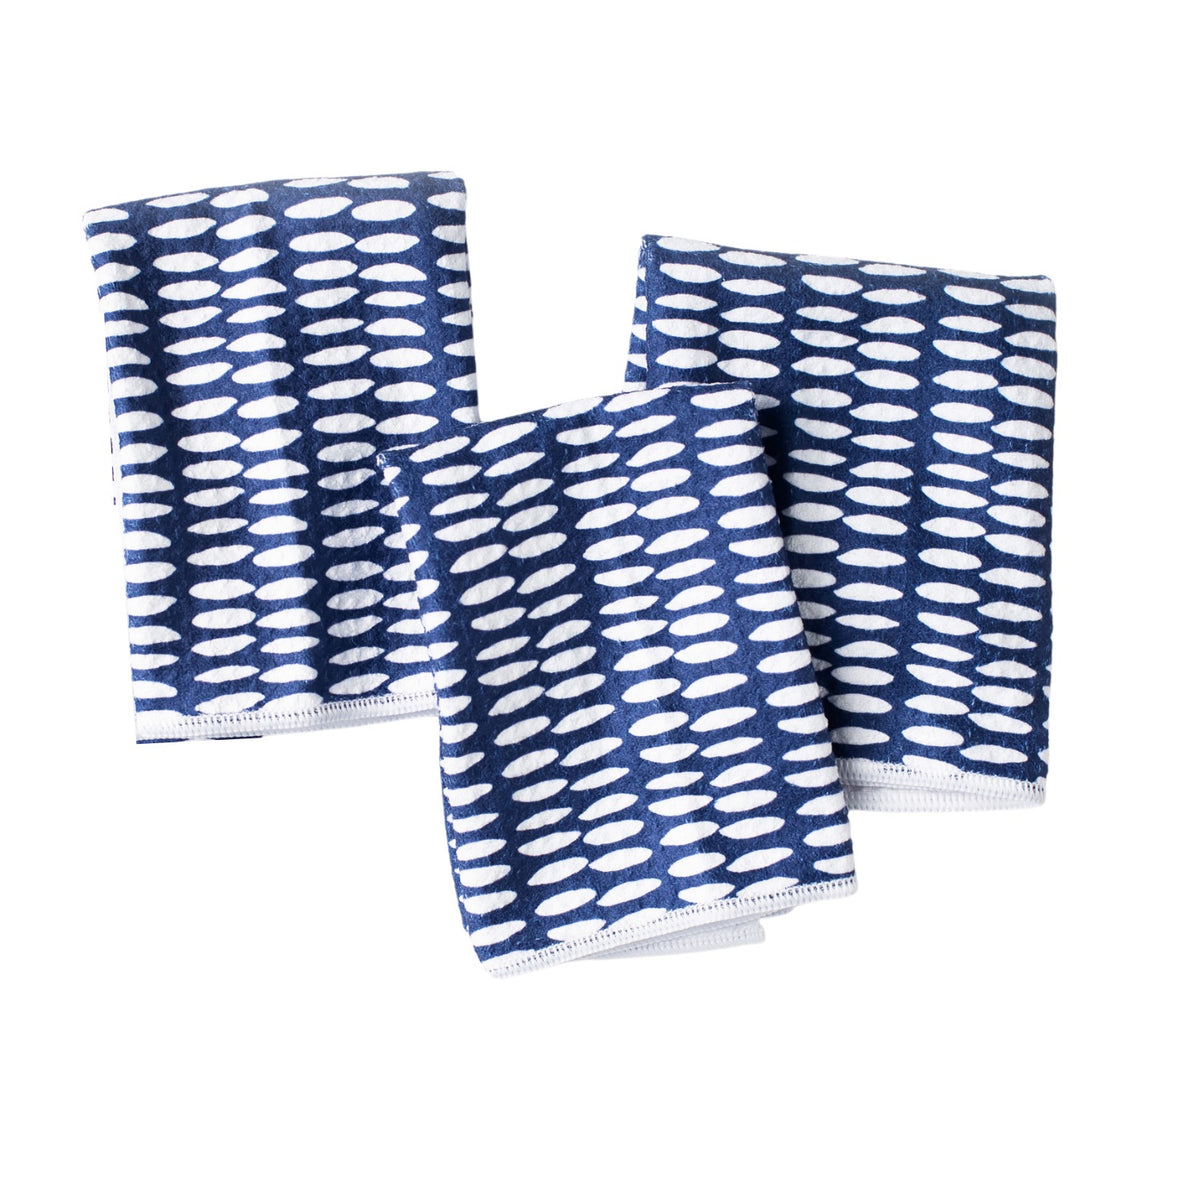 Ready, Set, Go Biggie Bundle - Beans in Navy Sponges &amp; Scouring Pads Once Again Home Co.   